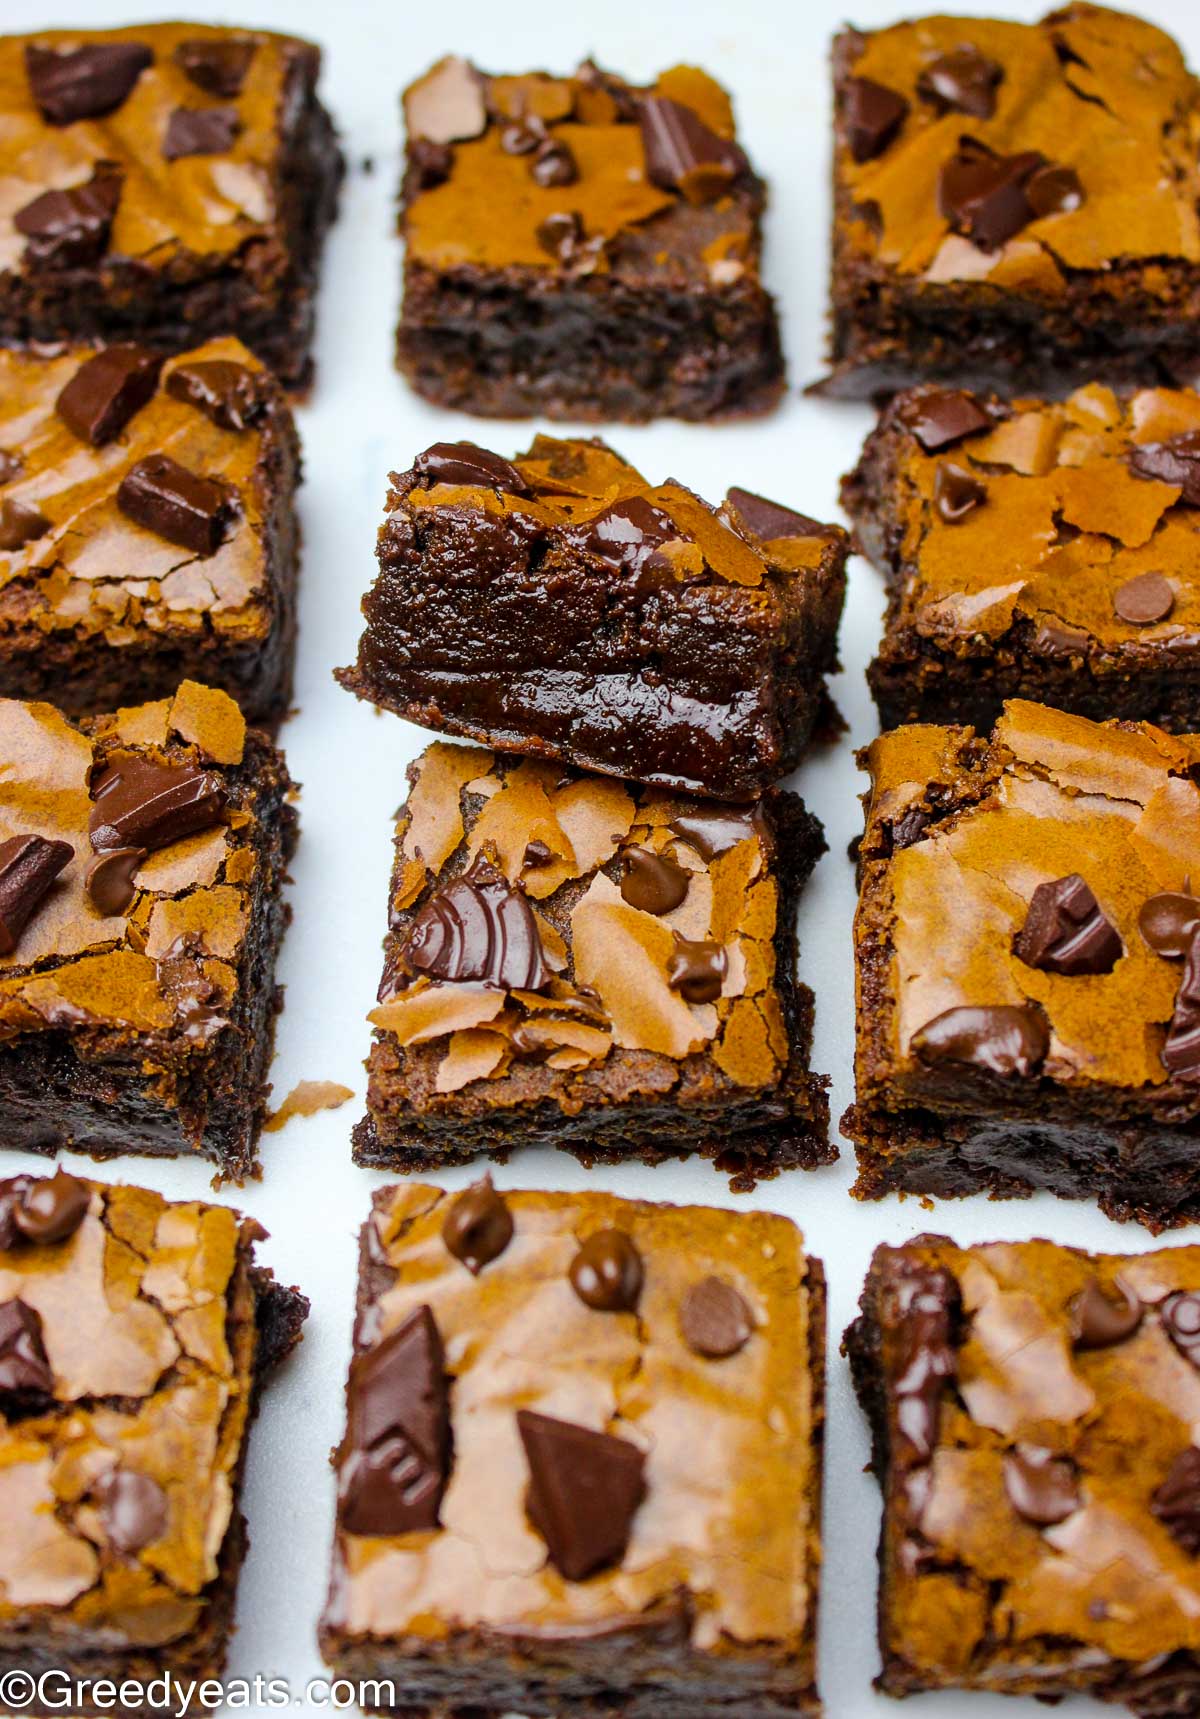 Super chewy and thick brownies that have crinkly tops and gooey edges.